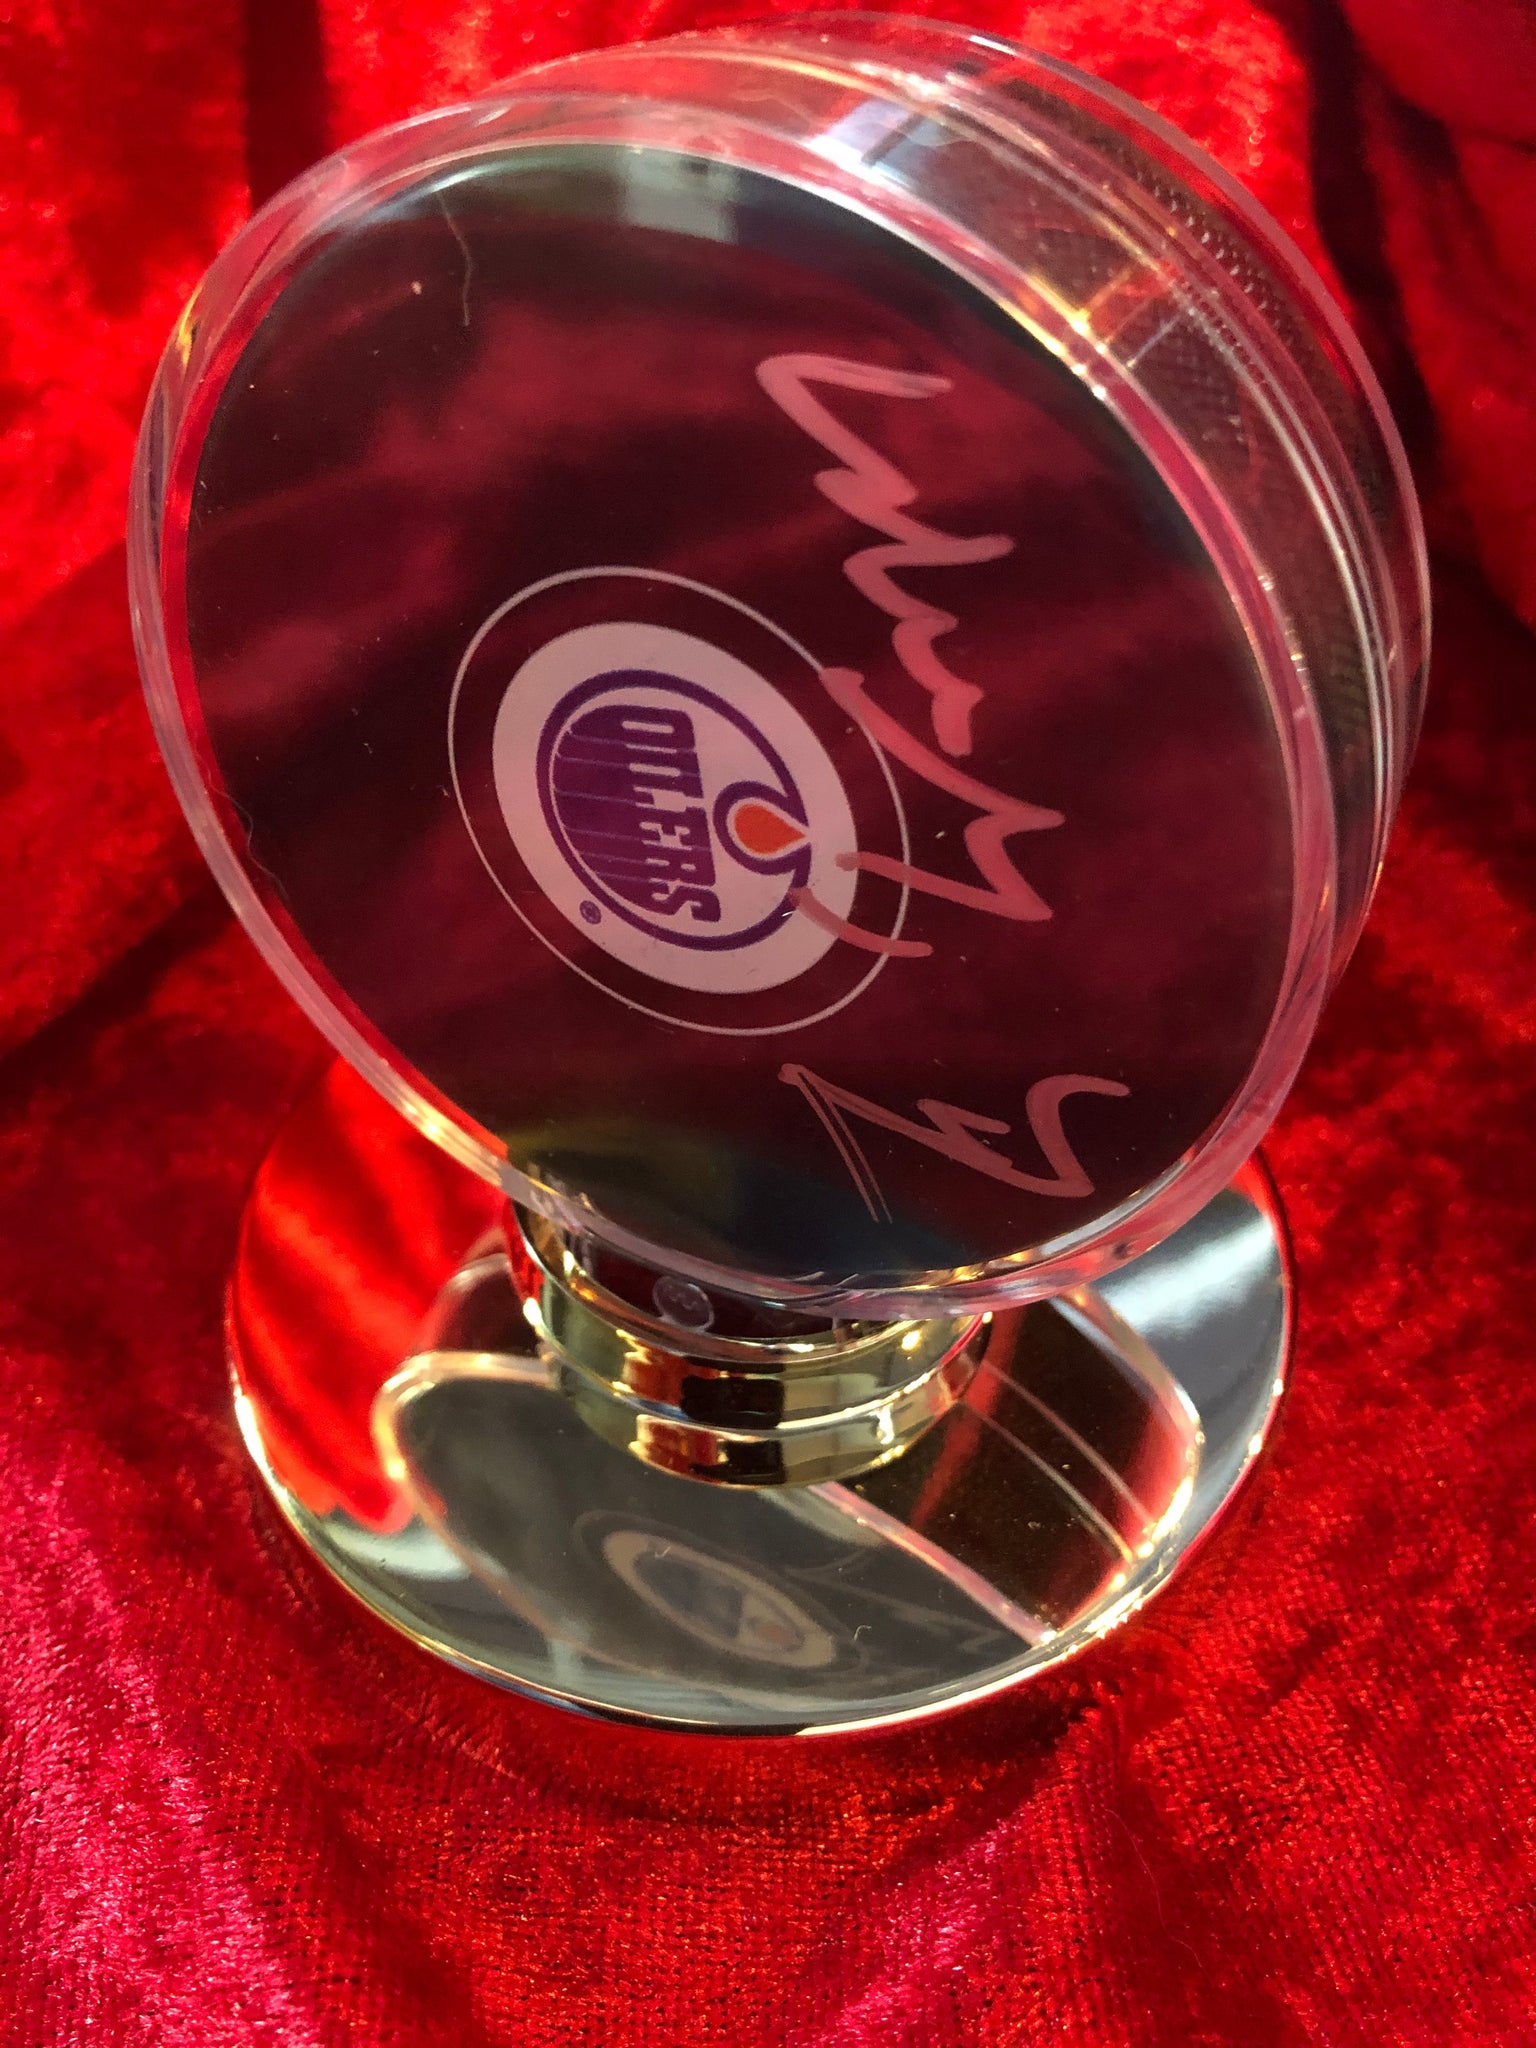 Wayne Gretzky Rangers Autograhped Certified Authentic Hockey Puck